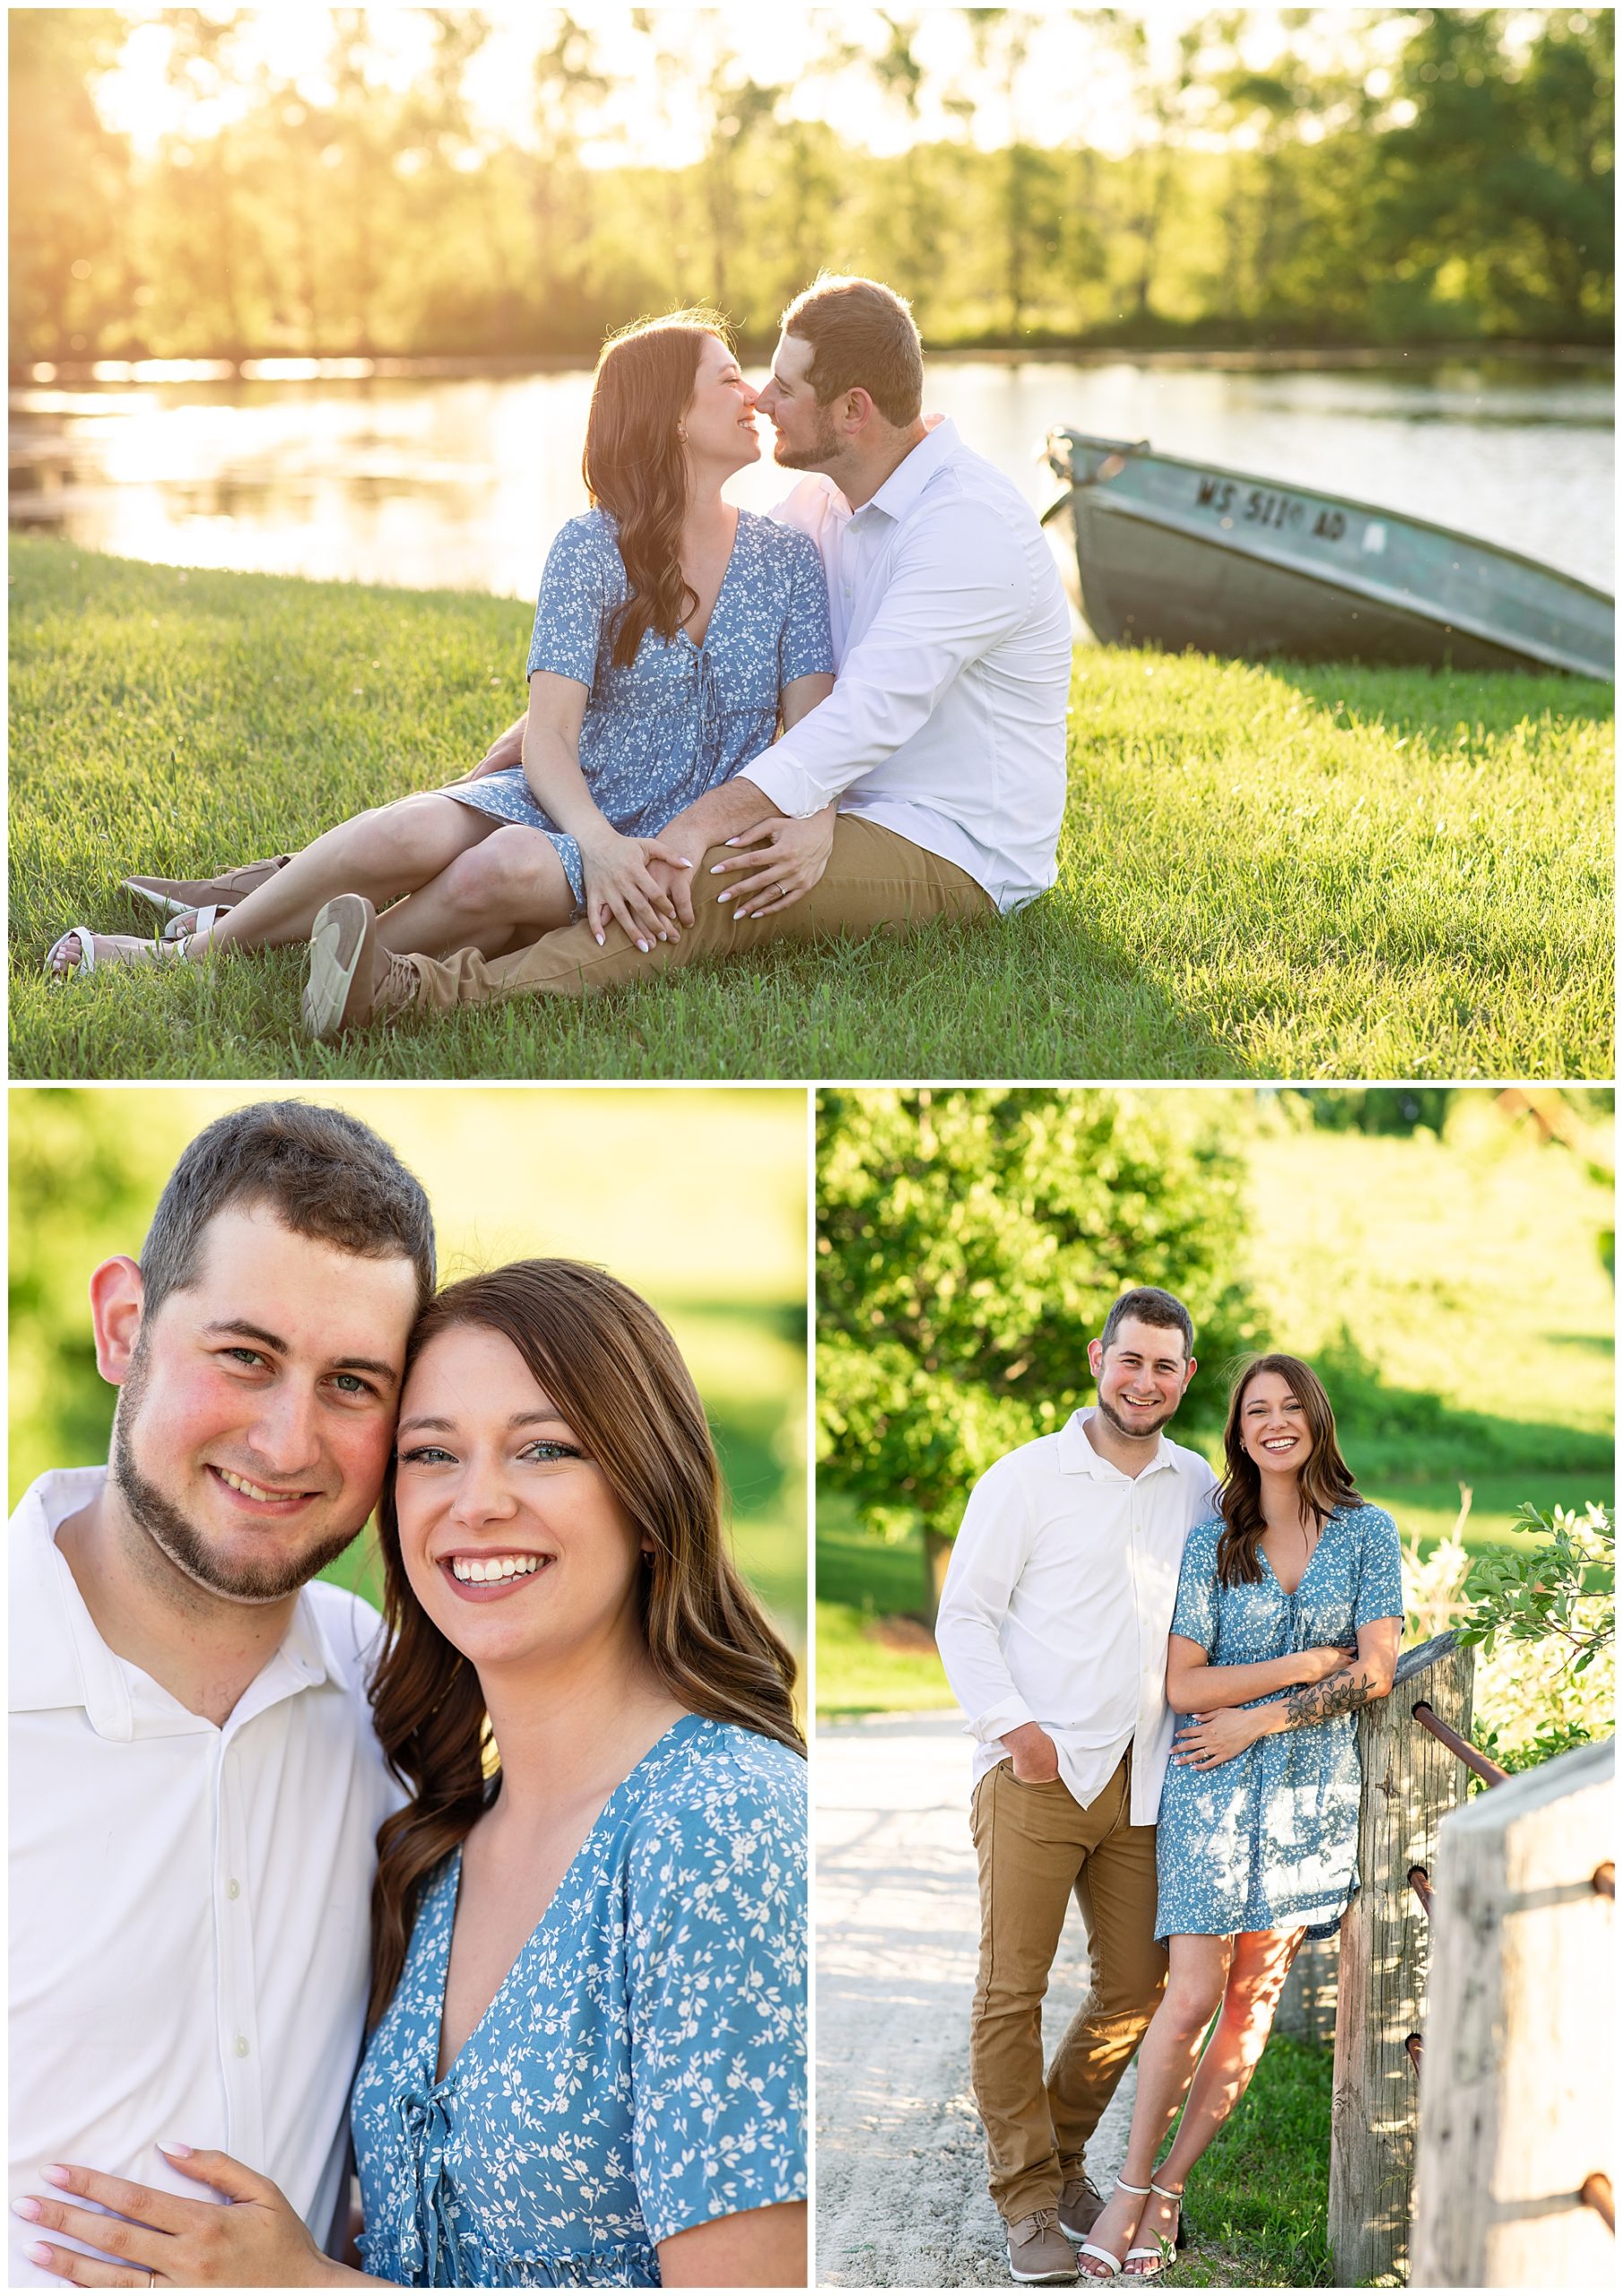 Notebook Inspired Engagement Session with Kuffel Photography